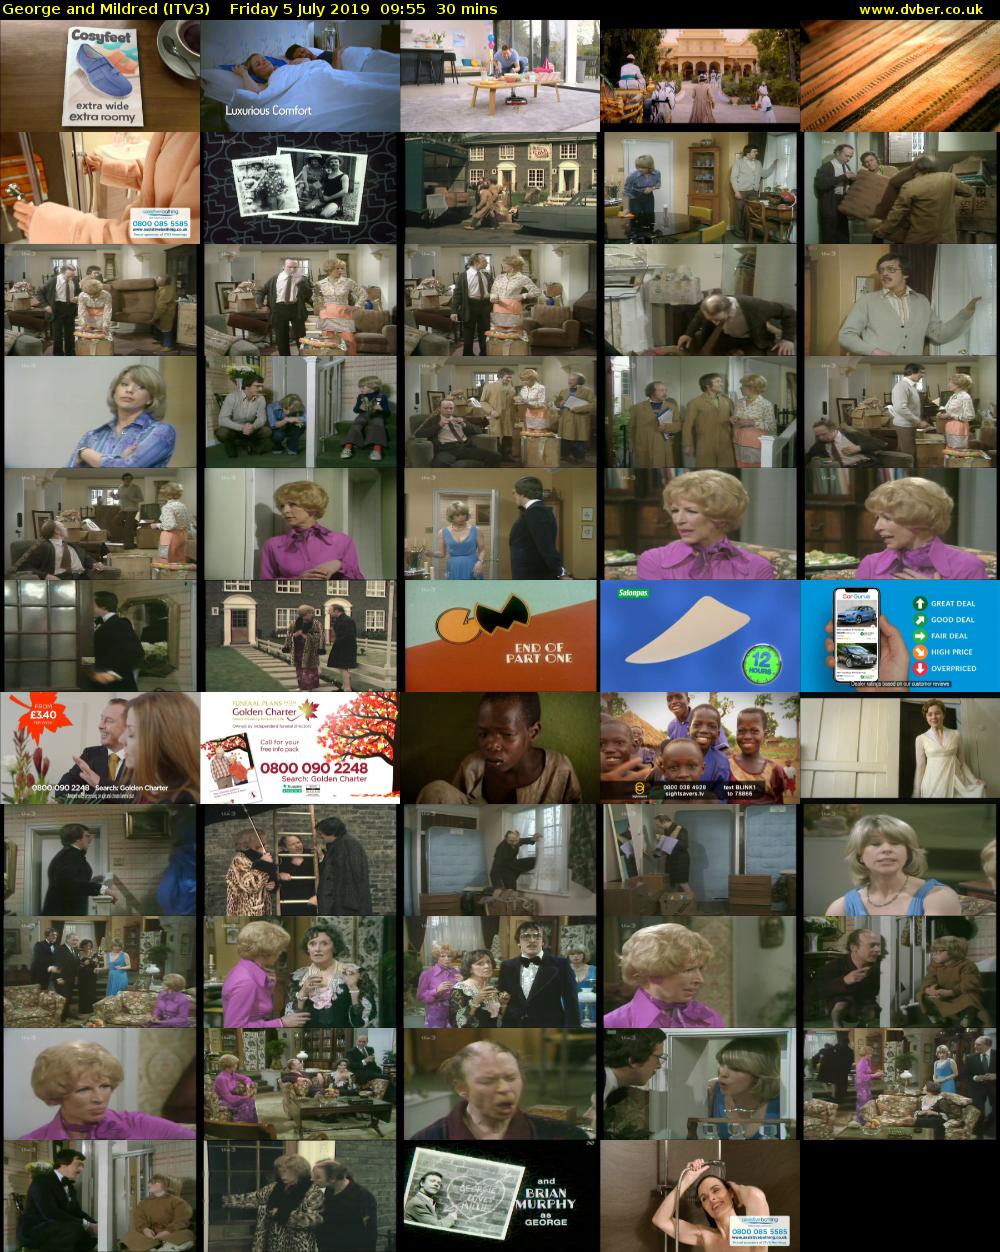 George and Mildred (ITV3) Friday 5 July 2019 09:55 - 10:25